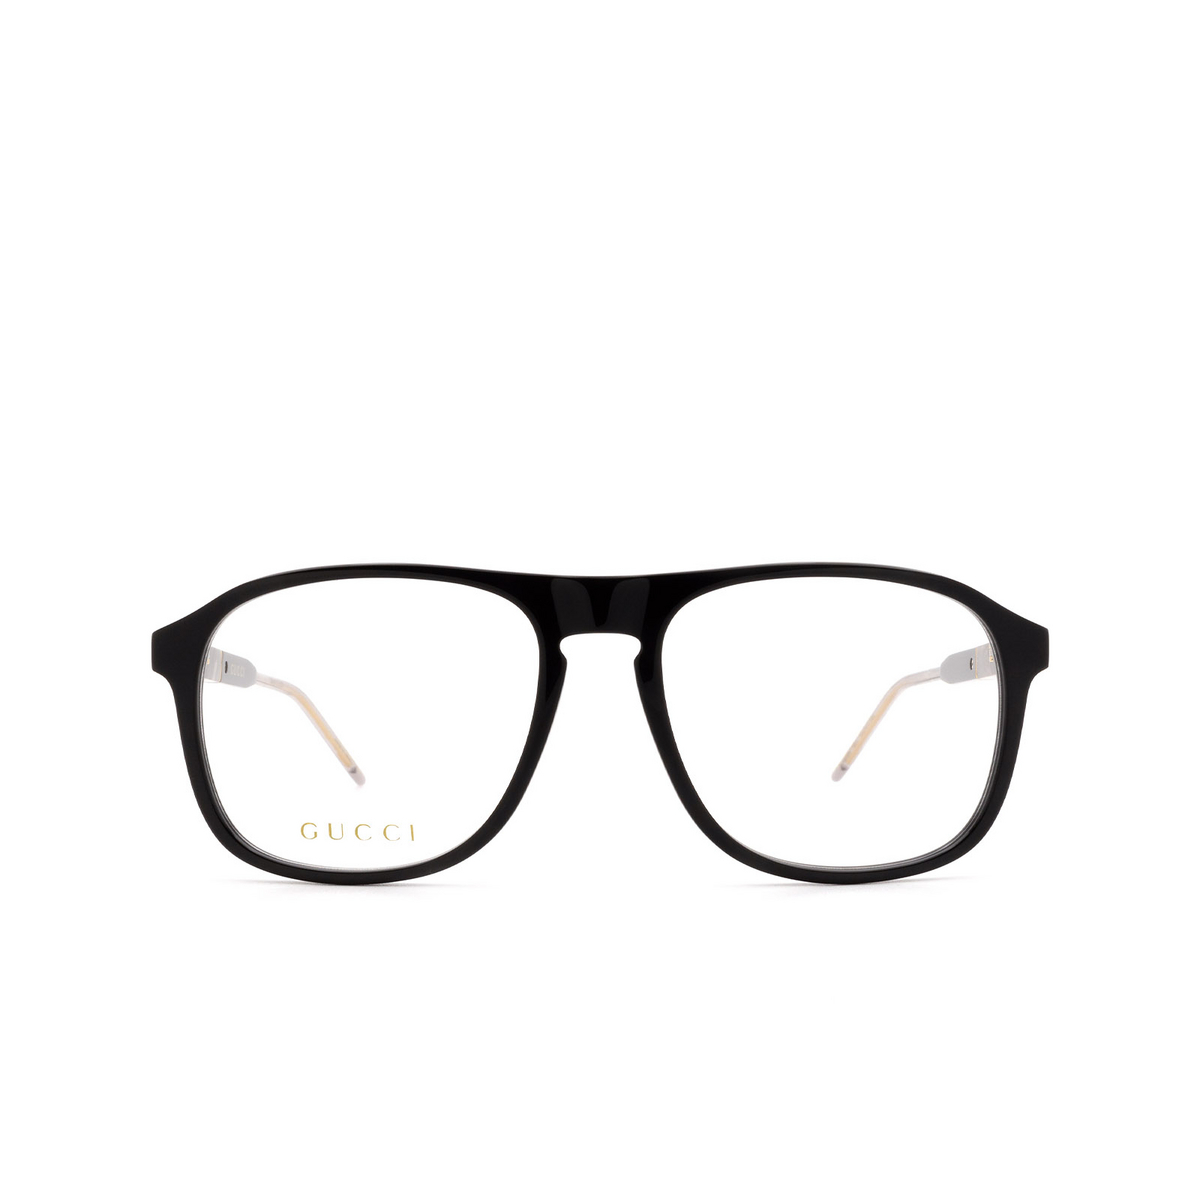 Gucci® Aviator Eyeglasses: GG0844O color Black 001 - front view.